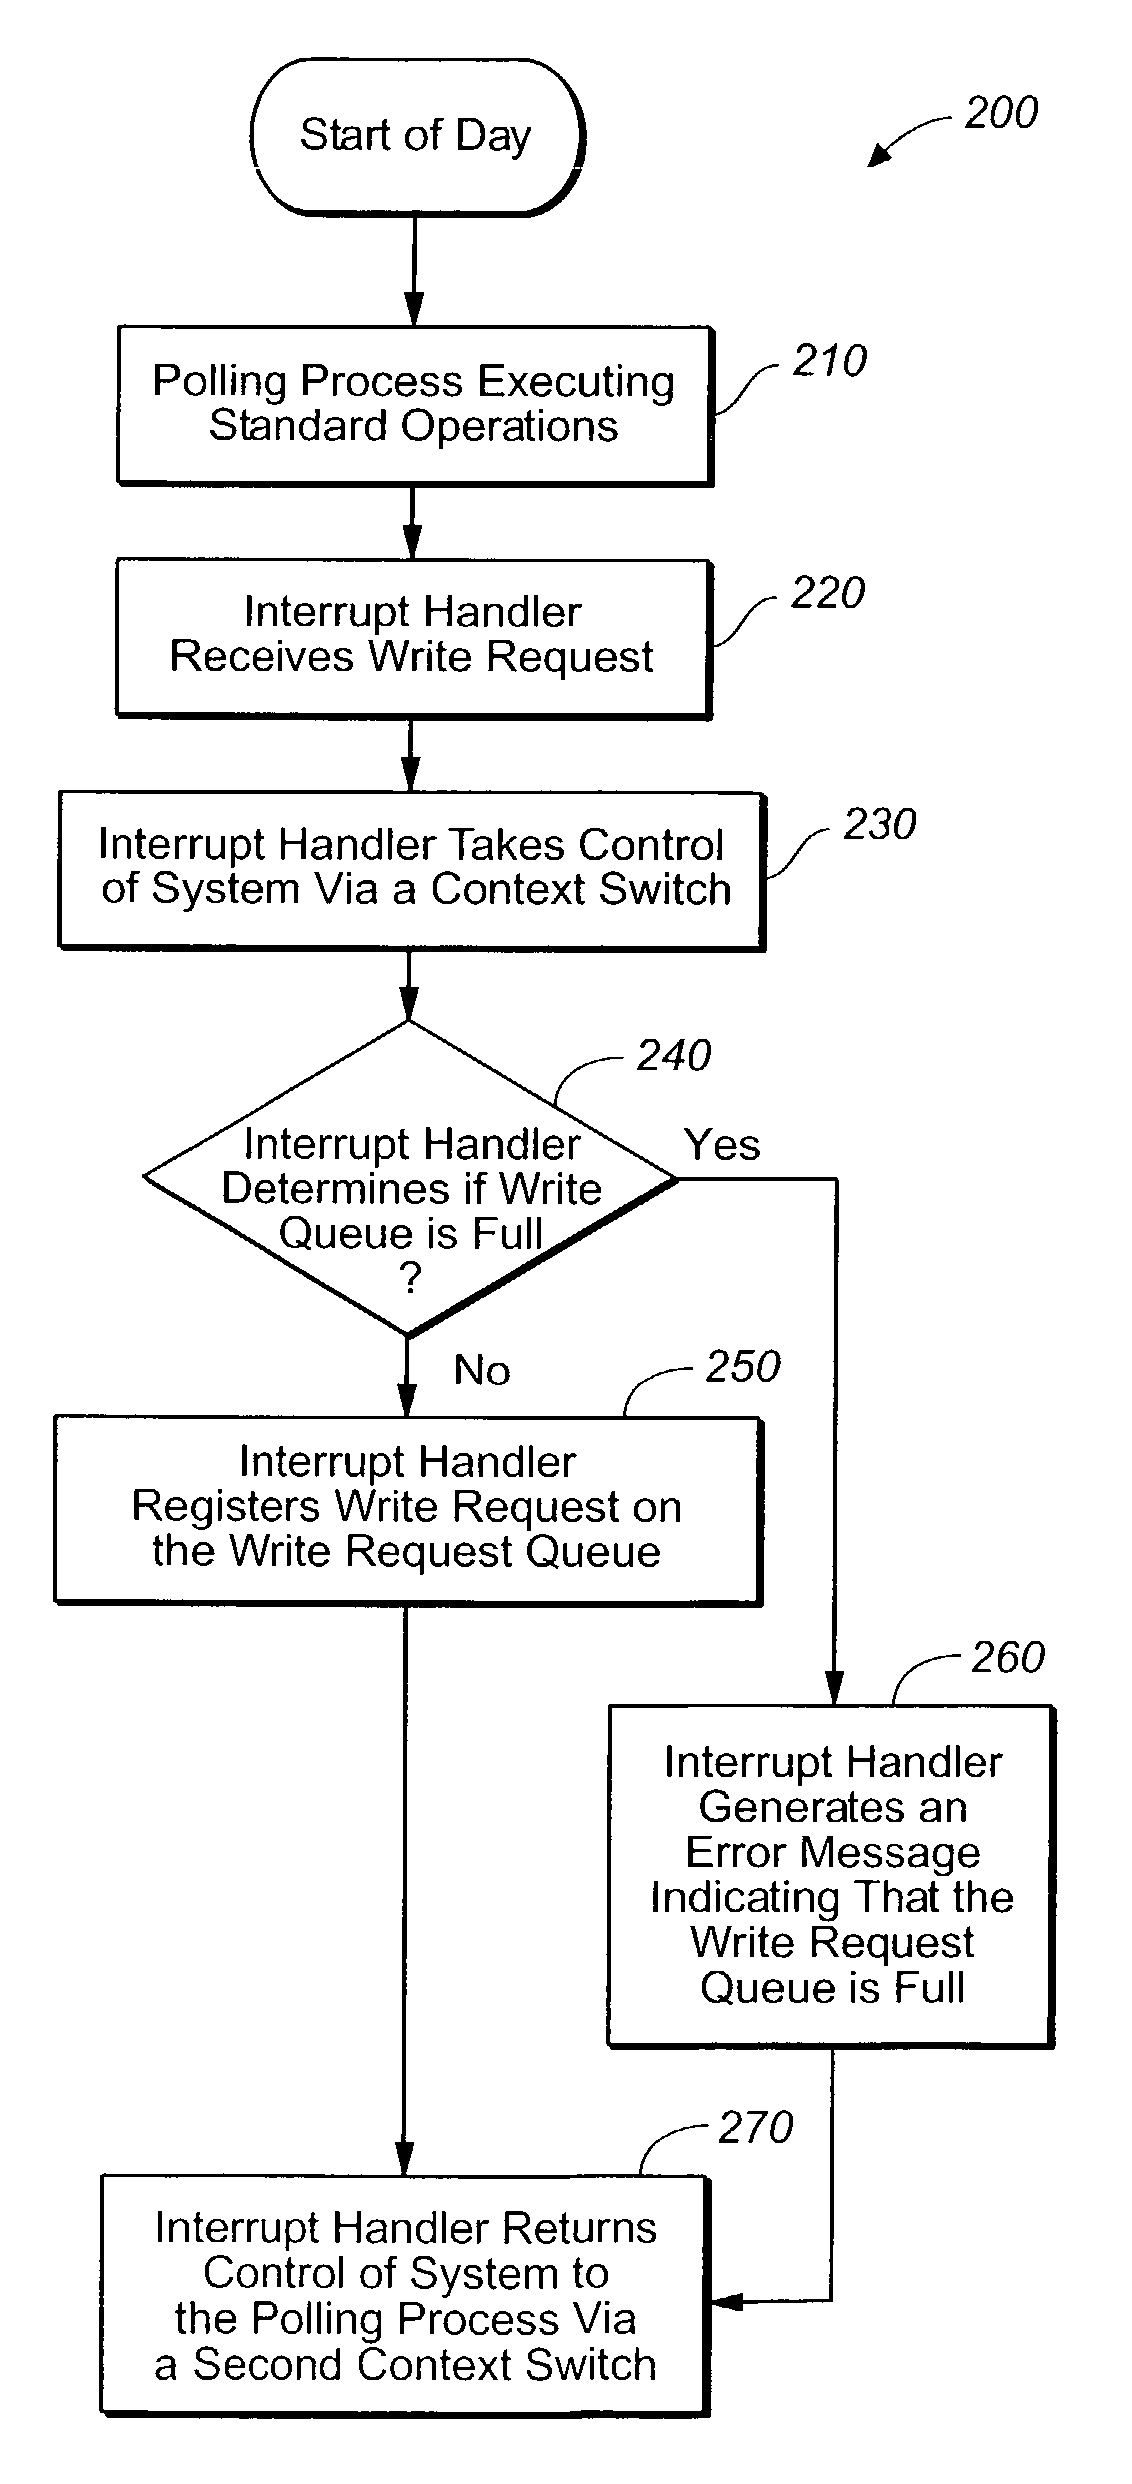 System and method for handling shared resource writes arriving via non-maskable interrupts (NMI) in single thread non-mission critical systems with limited memory space